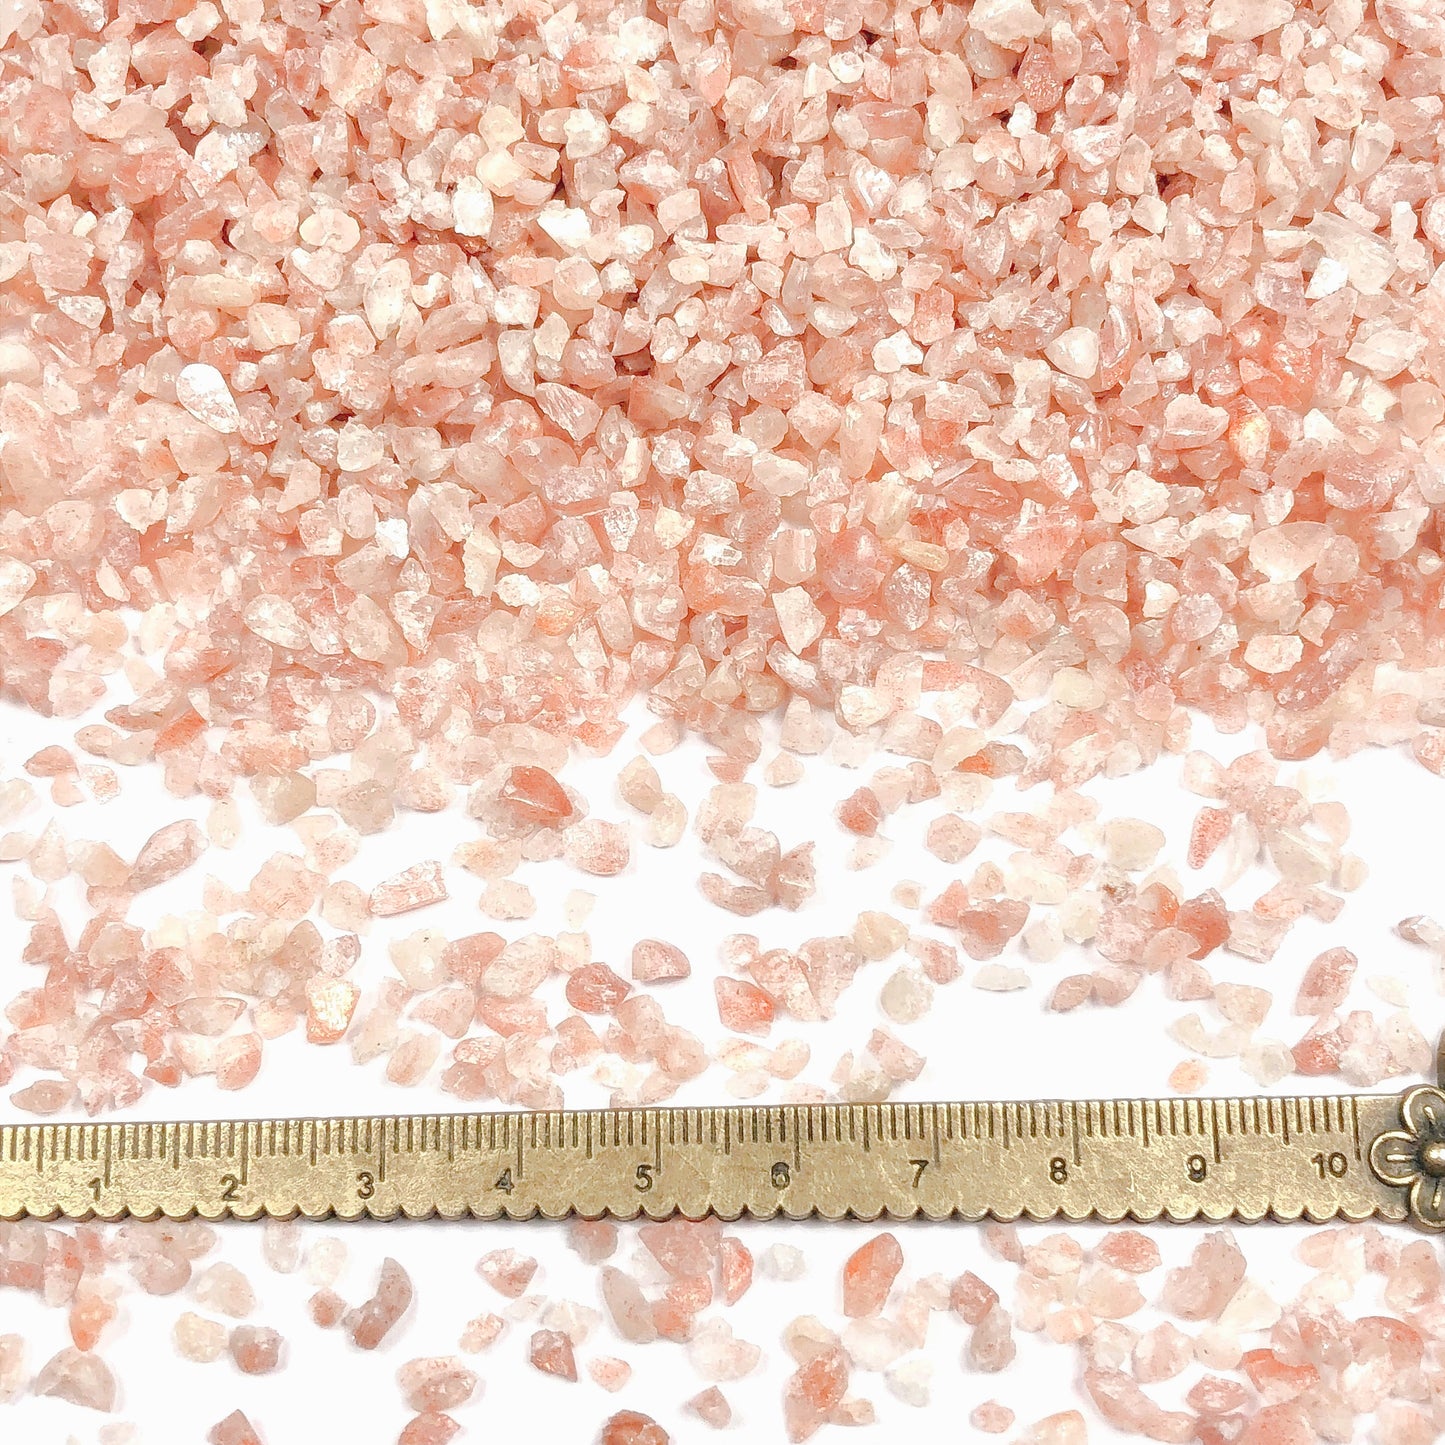 Crushed Peach Sunstone from India, Coarse Crush, Gravel Size, 4mm - 2mm